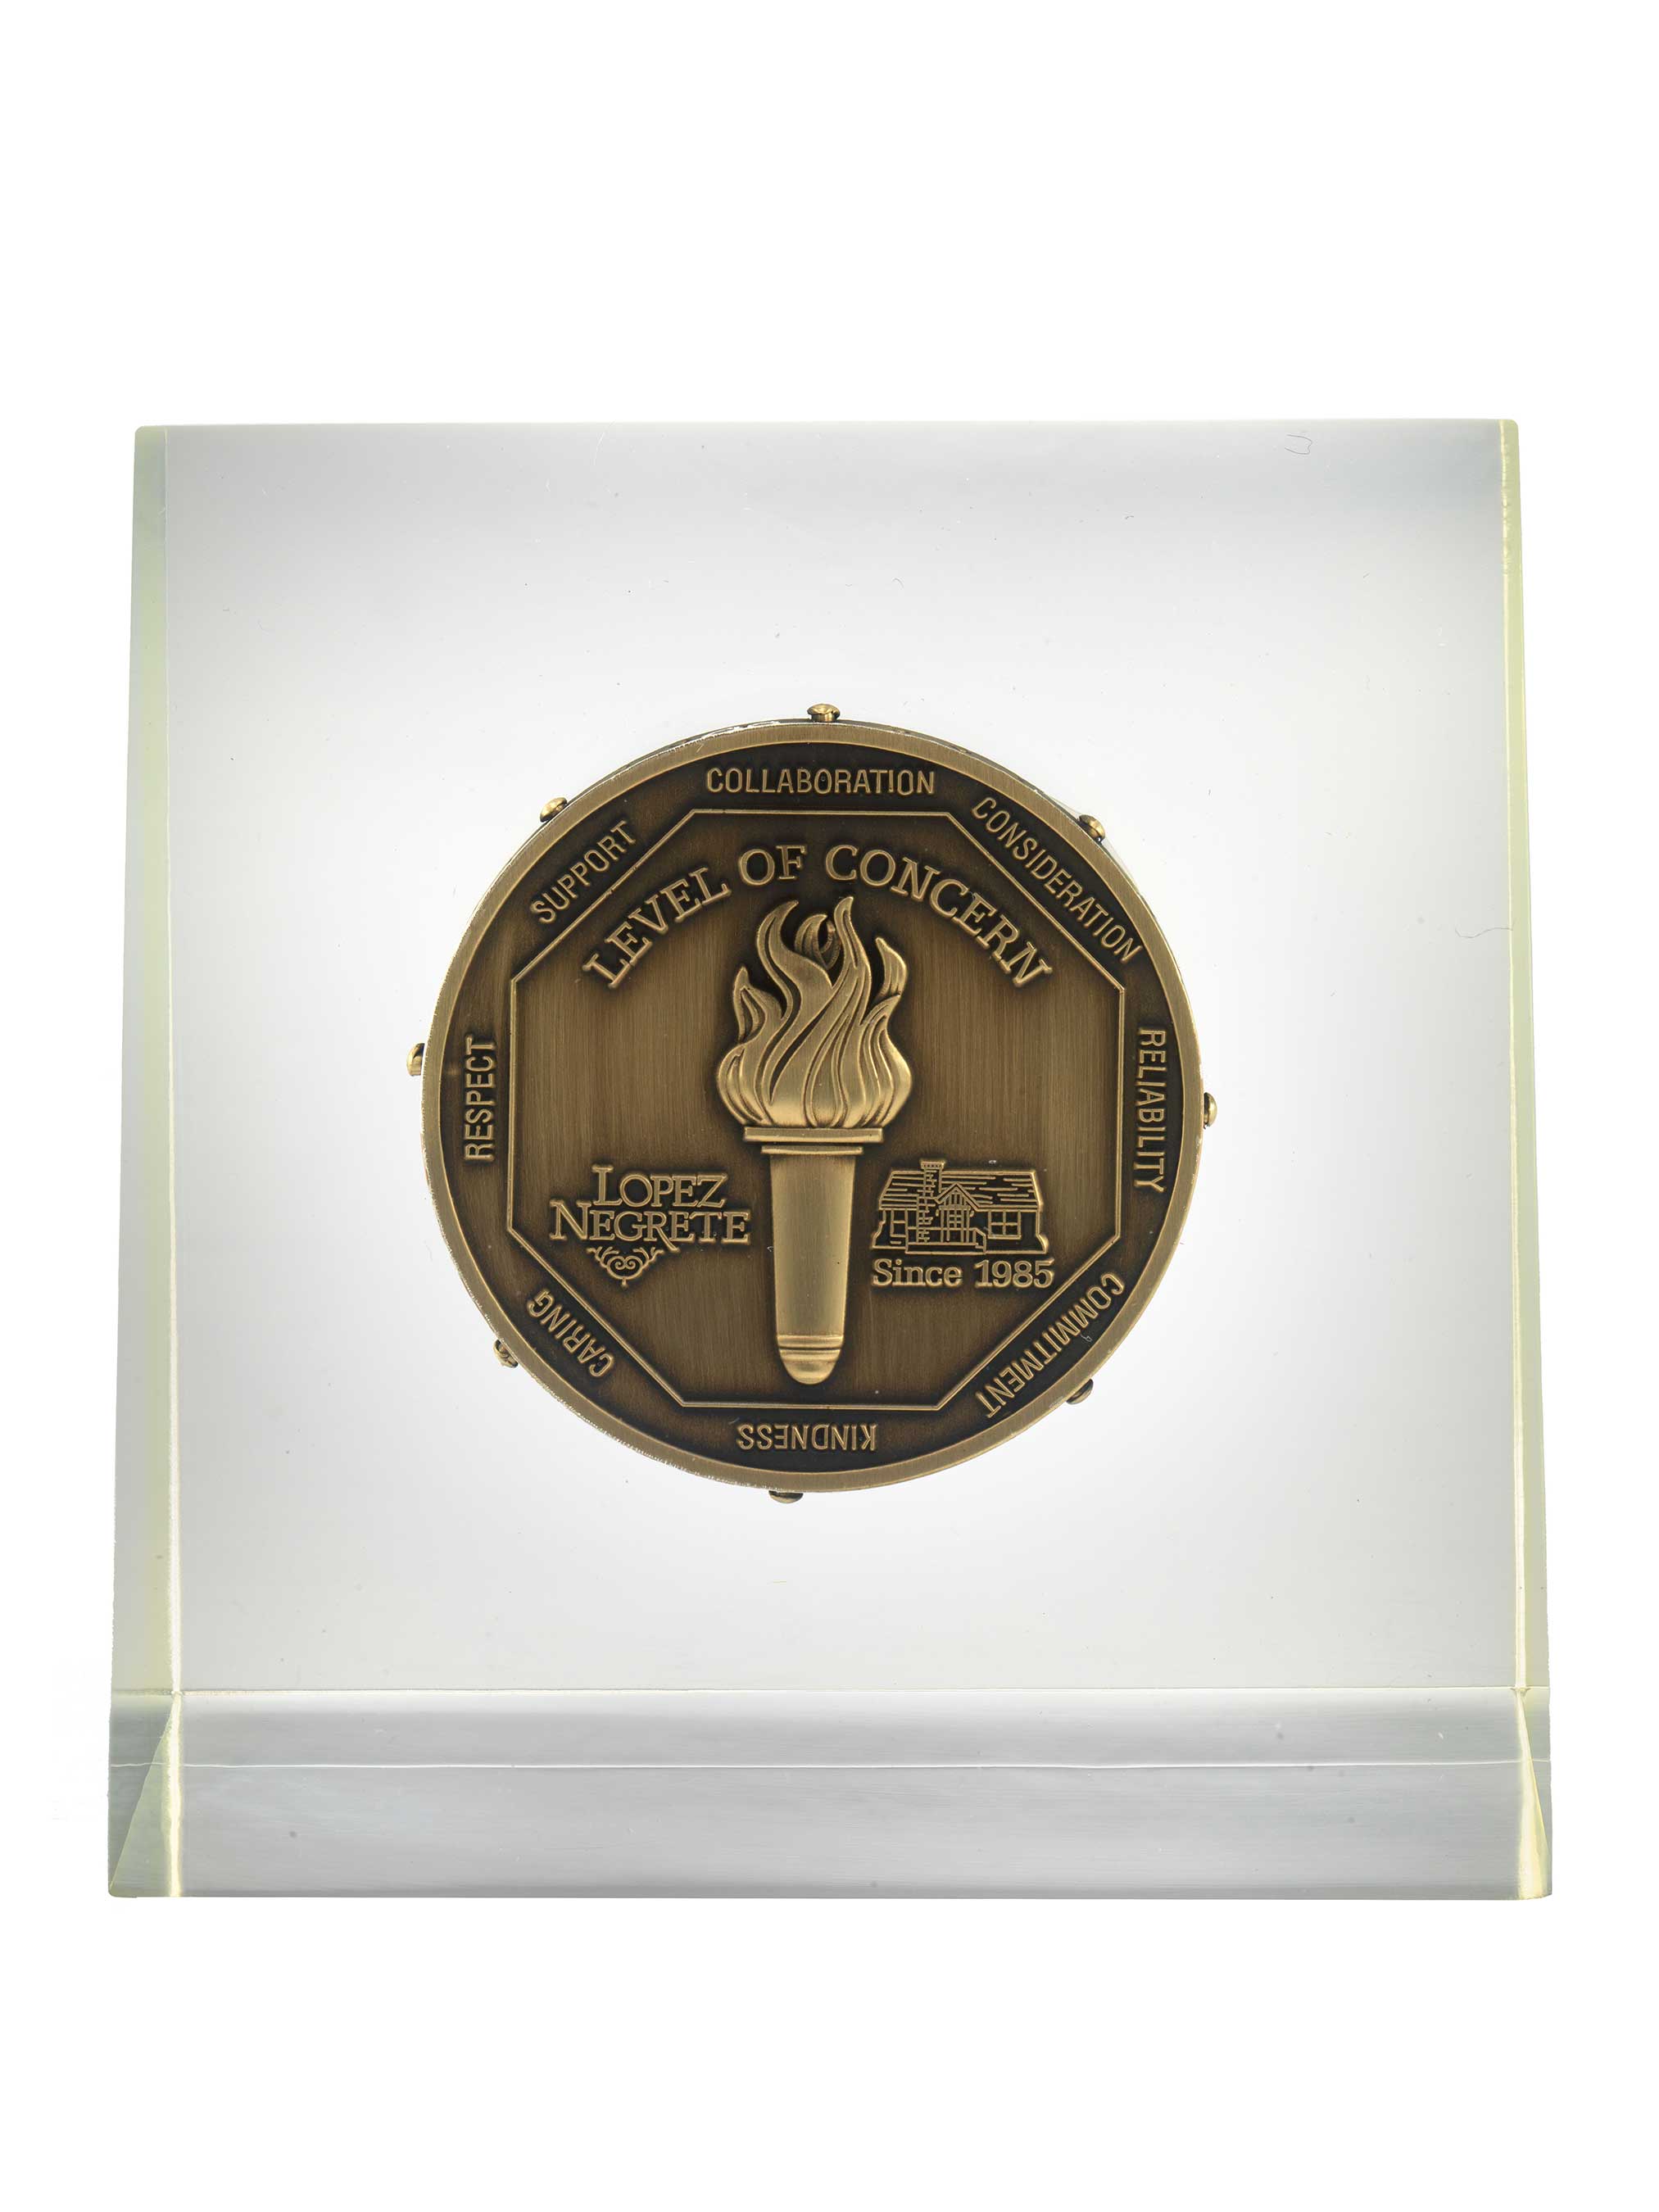 Lopez Negrete Communications, coin with the credo that has guided the agency since its inception